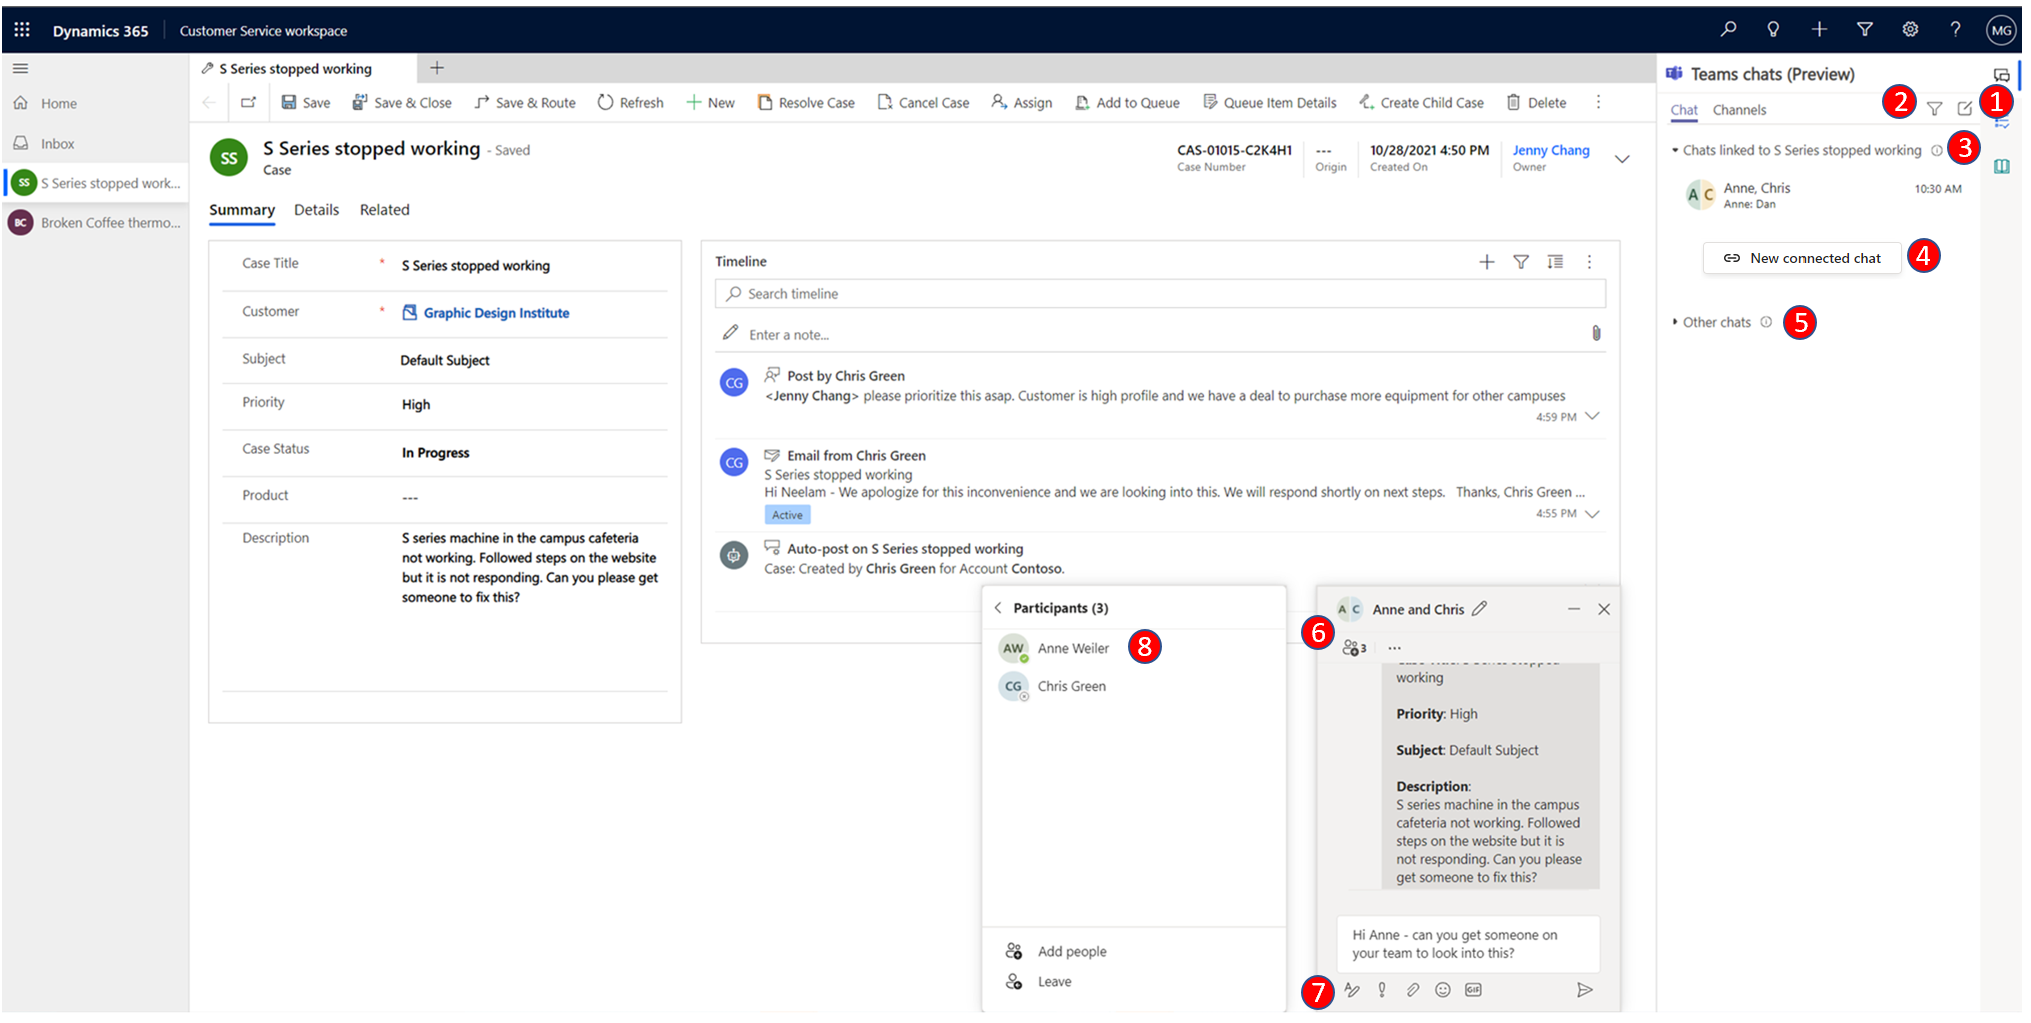 Agent view of the Microsoft Teams chat experience